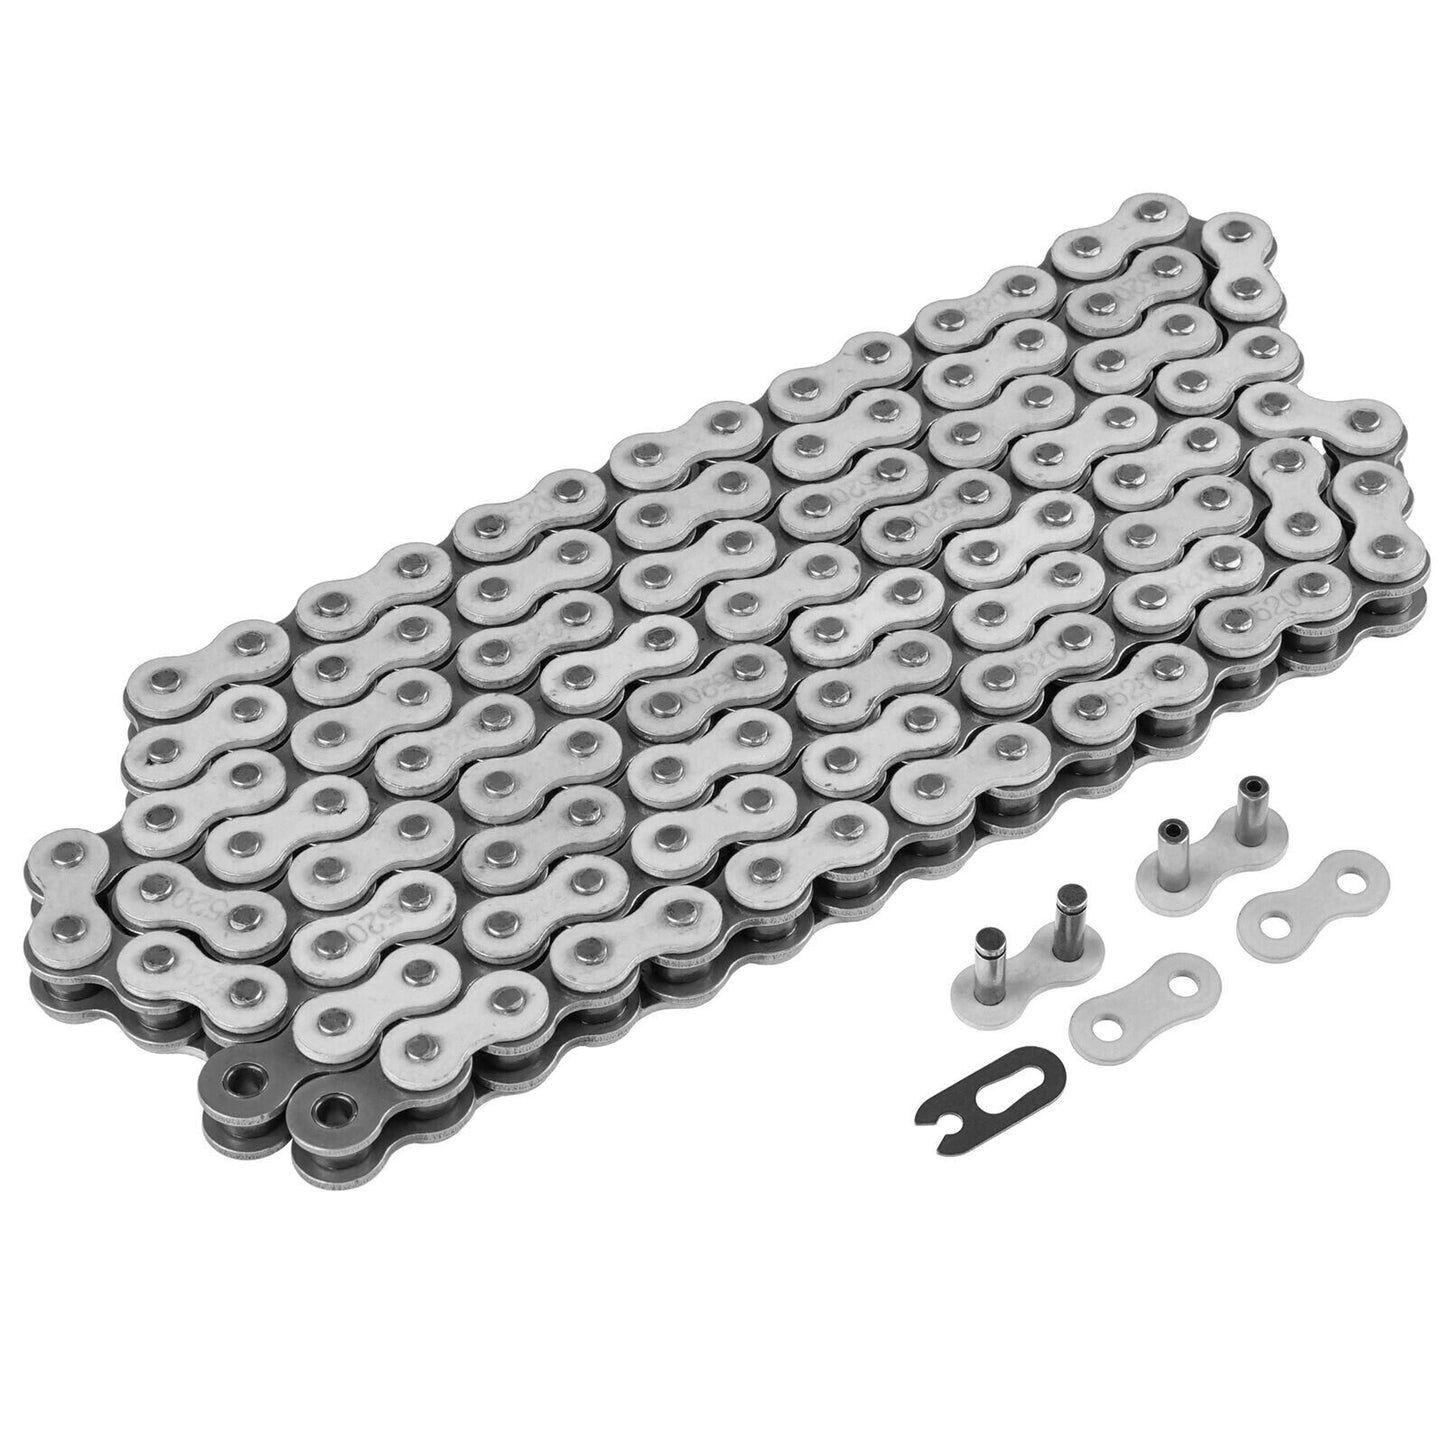 White Drive Chain for Bike | Motorcycle Quad 520-Pitch 120-Links Non O-Ring